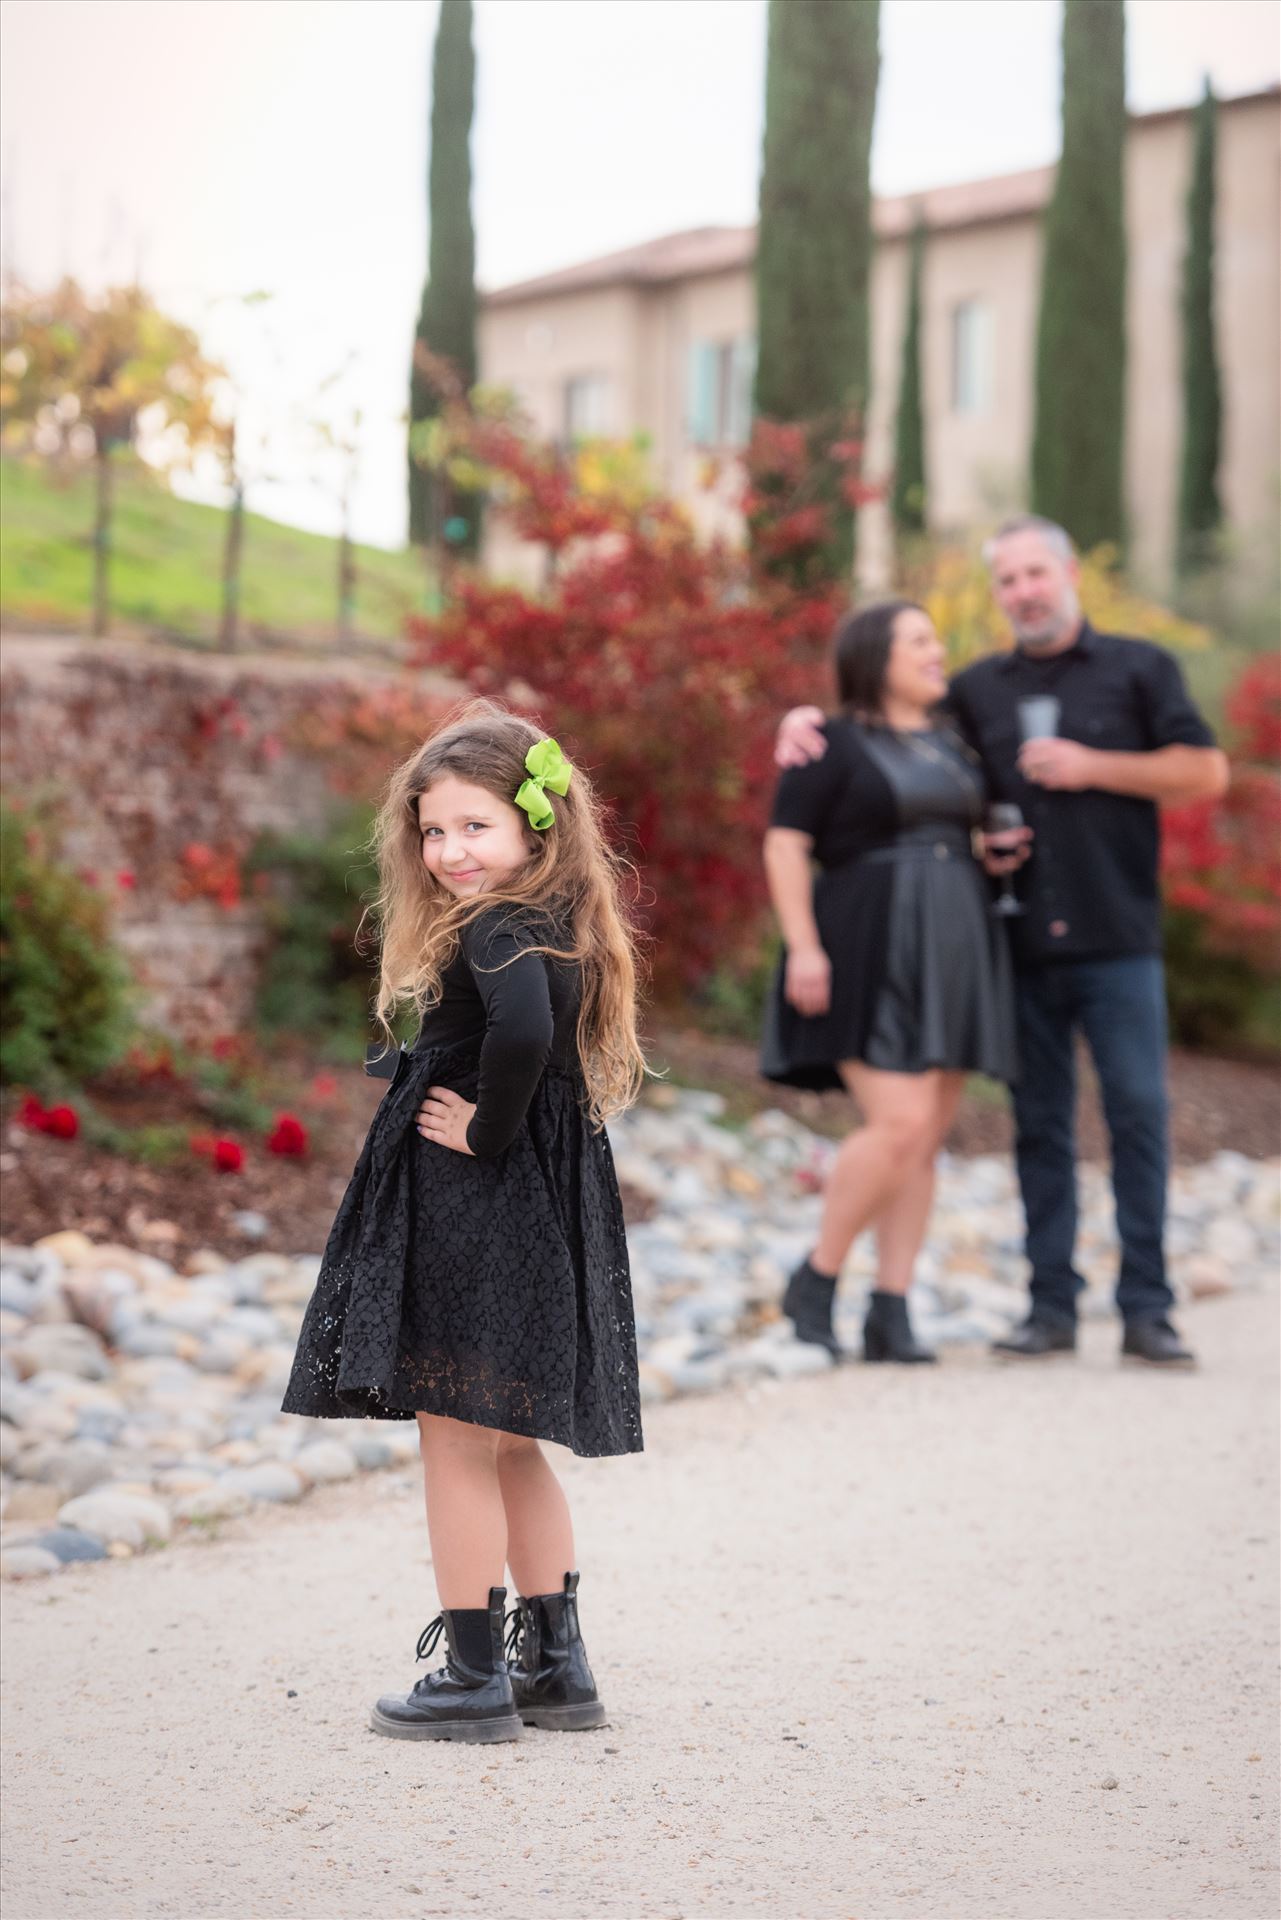 Final-8219.JPG Sarah Williams of Mirror's Edge Photography, a San Luis Obispo Wedding, Engagement and Portrait Photographer, captures the Foster Family Fall Session at the gorgeous Allegretto Resort and Vineyards in Paso Robles, California. Littles up front by Sarah Williams